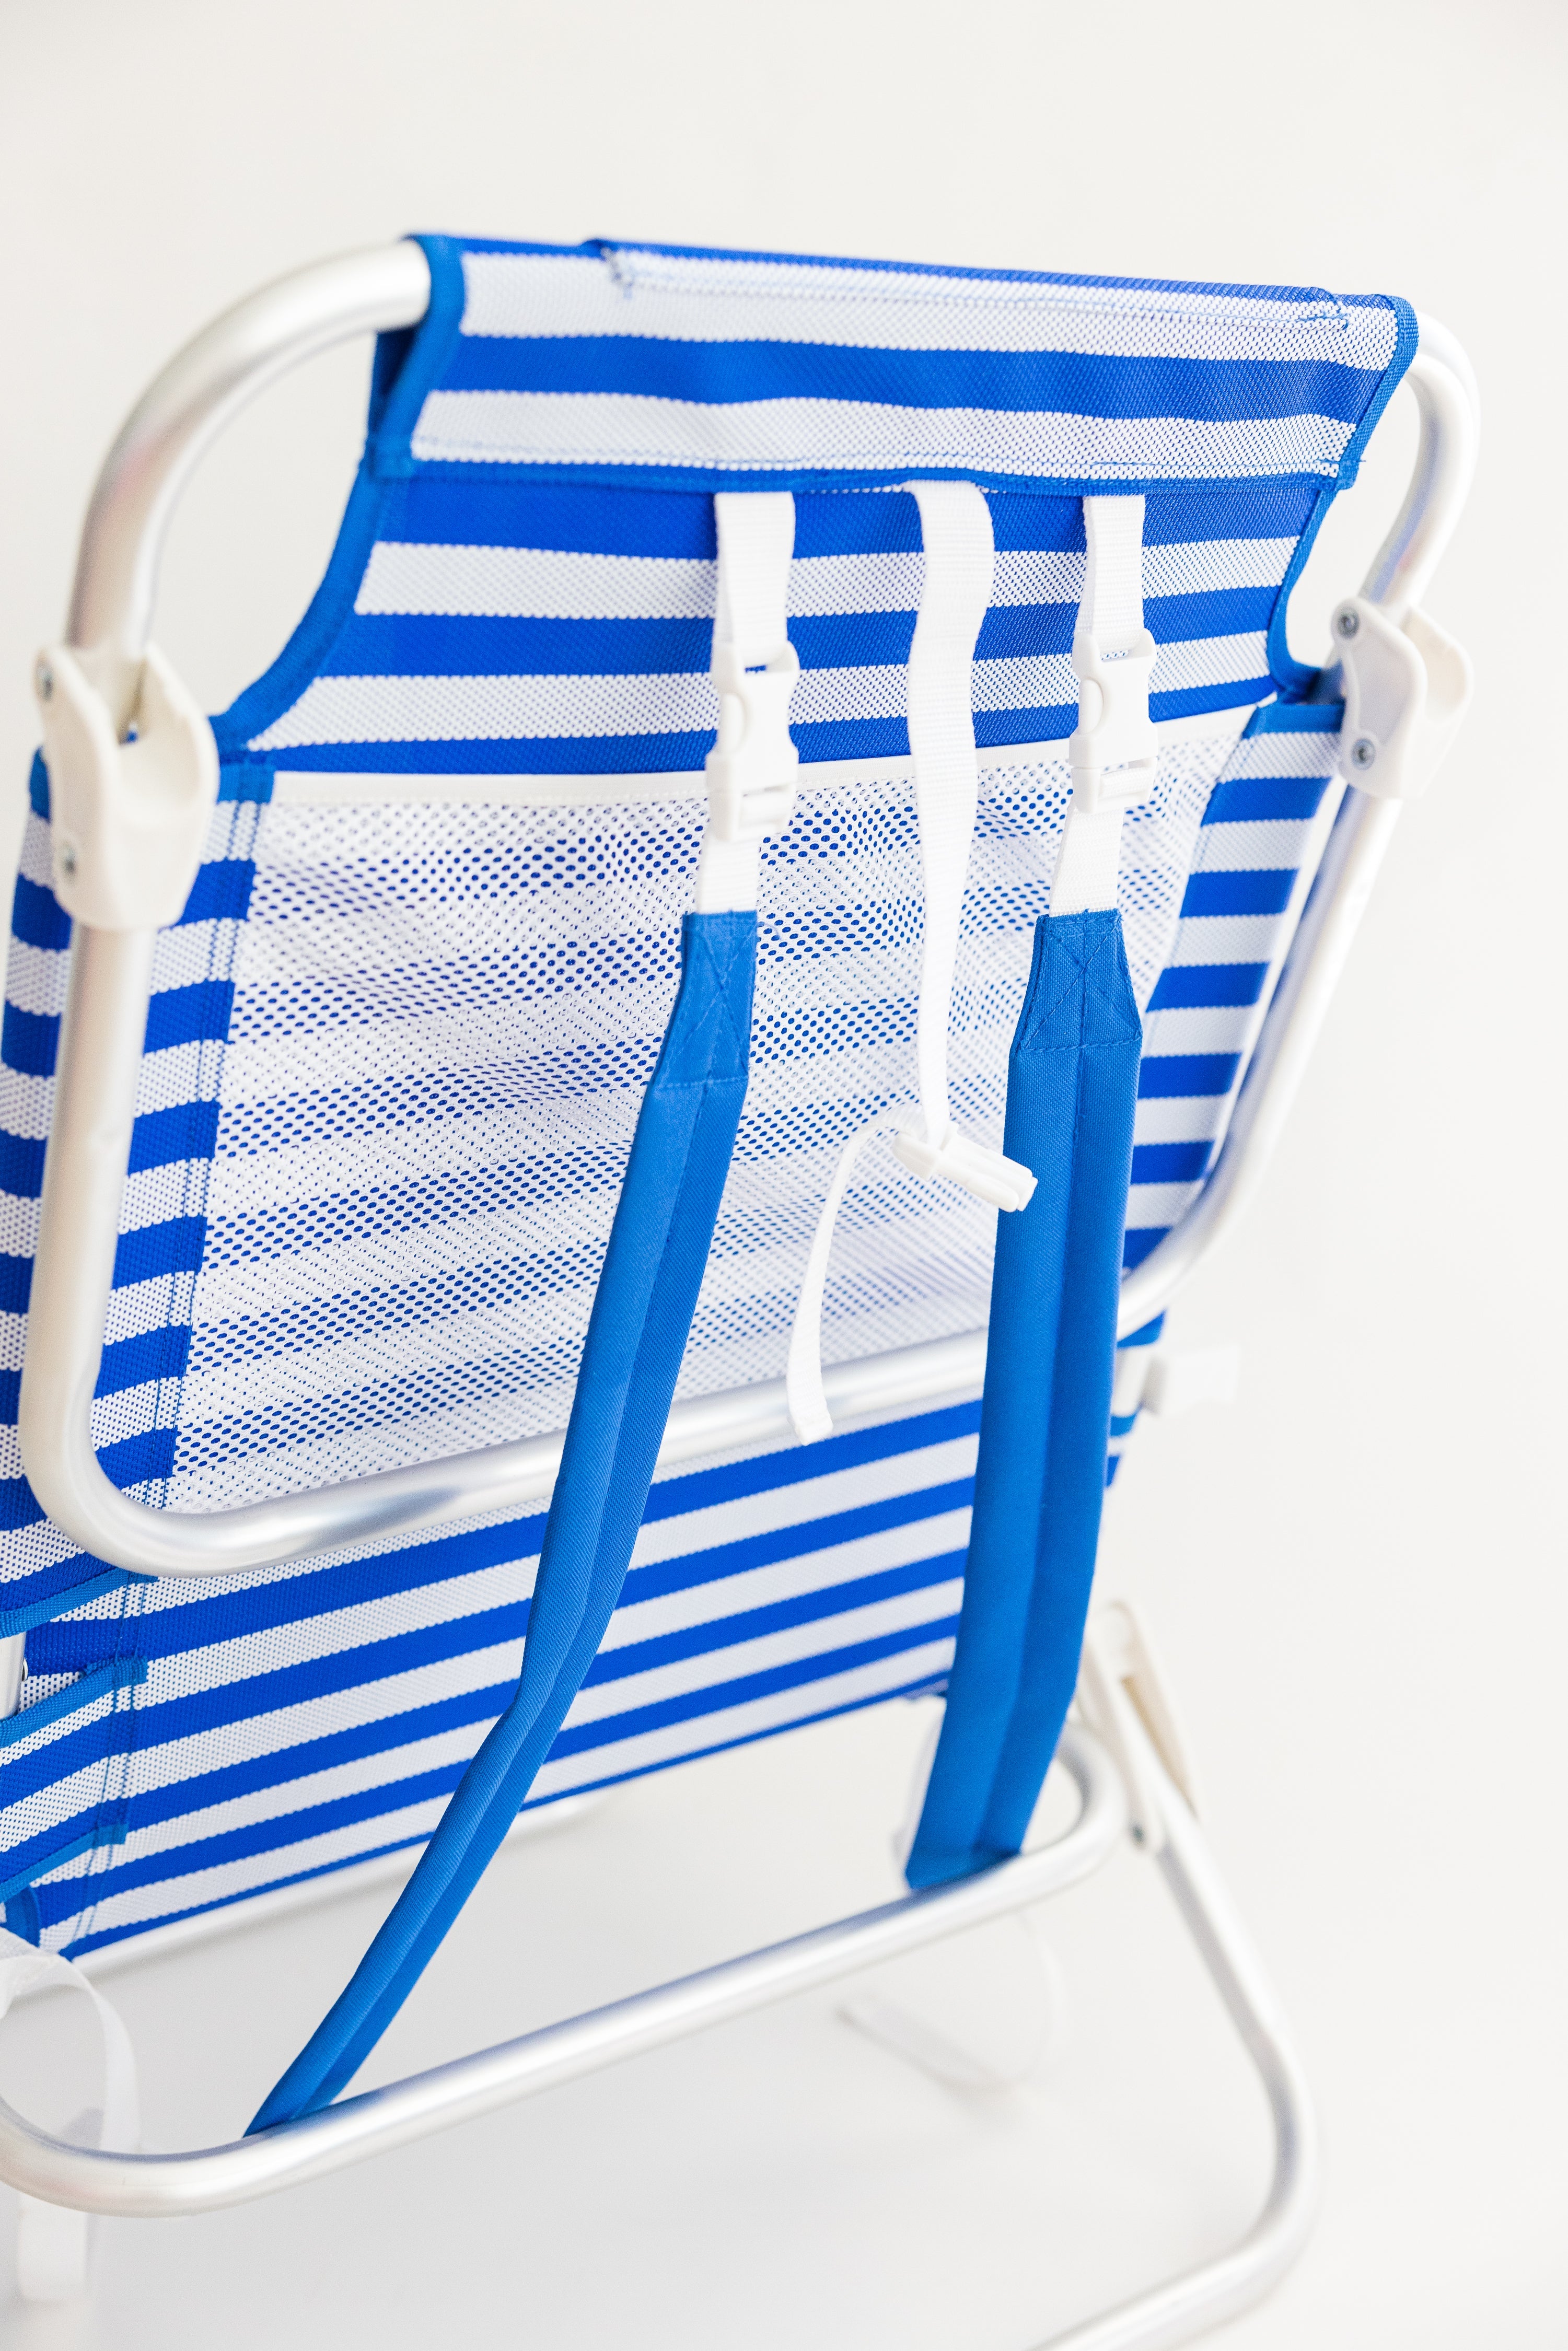 Wholesale Lay Flat Backpack Beach Chairs - Case Pack of 4